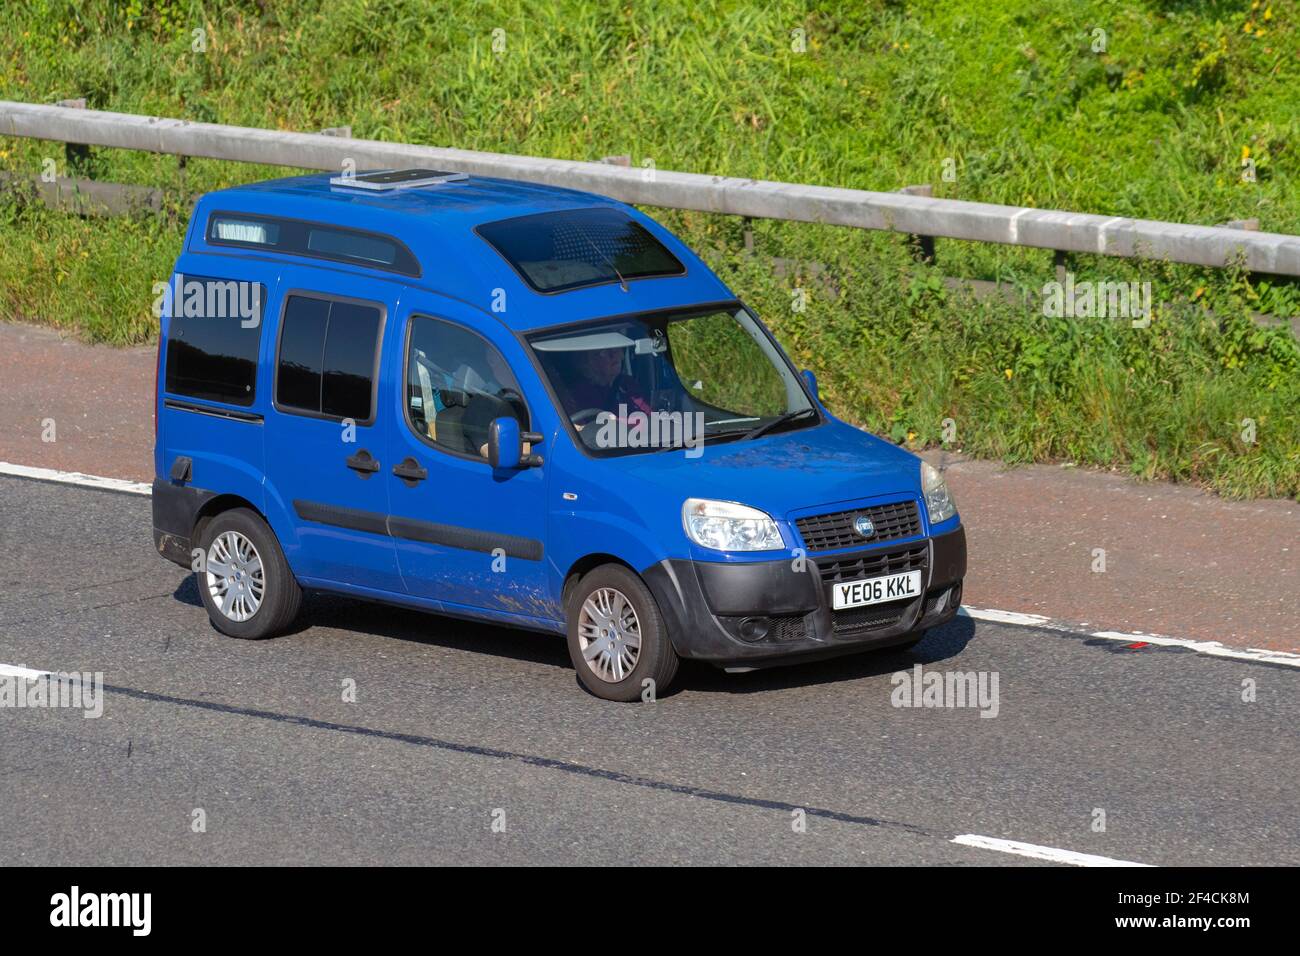 2006 Fiat Doblo Active M-Jet 1248cc diesel small MPV:  Vehicular traffic, moving vehicles, cars, vehicle driving on UK roads, motors, motoring on the M6 highway English motorway road network Stock Photo